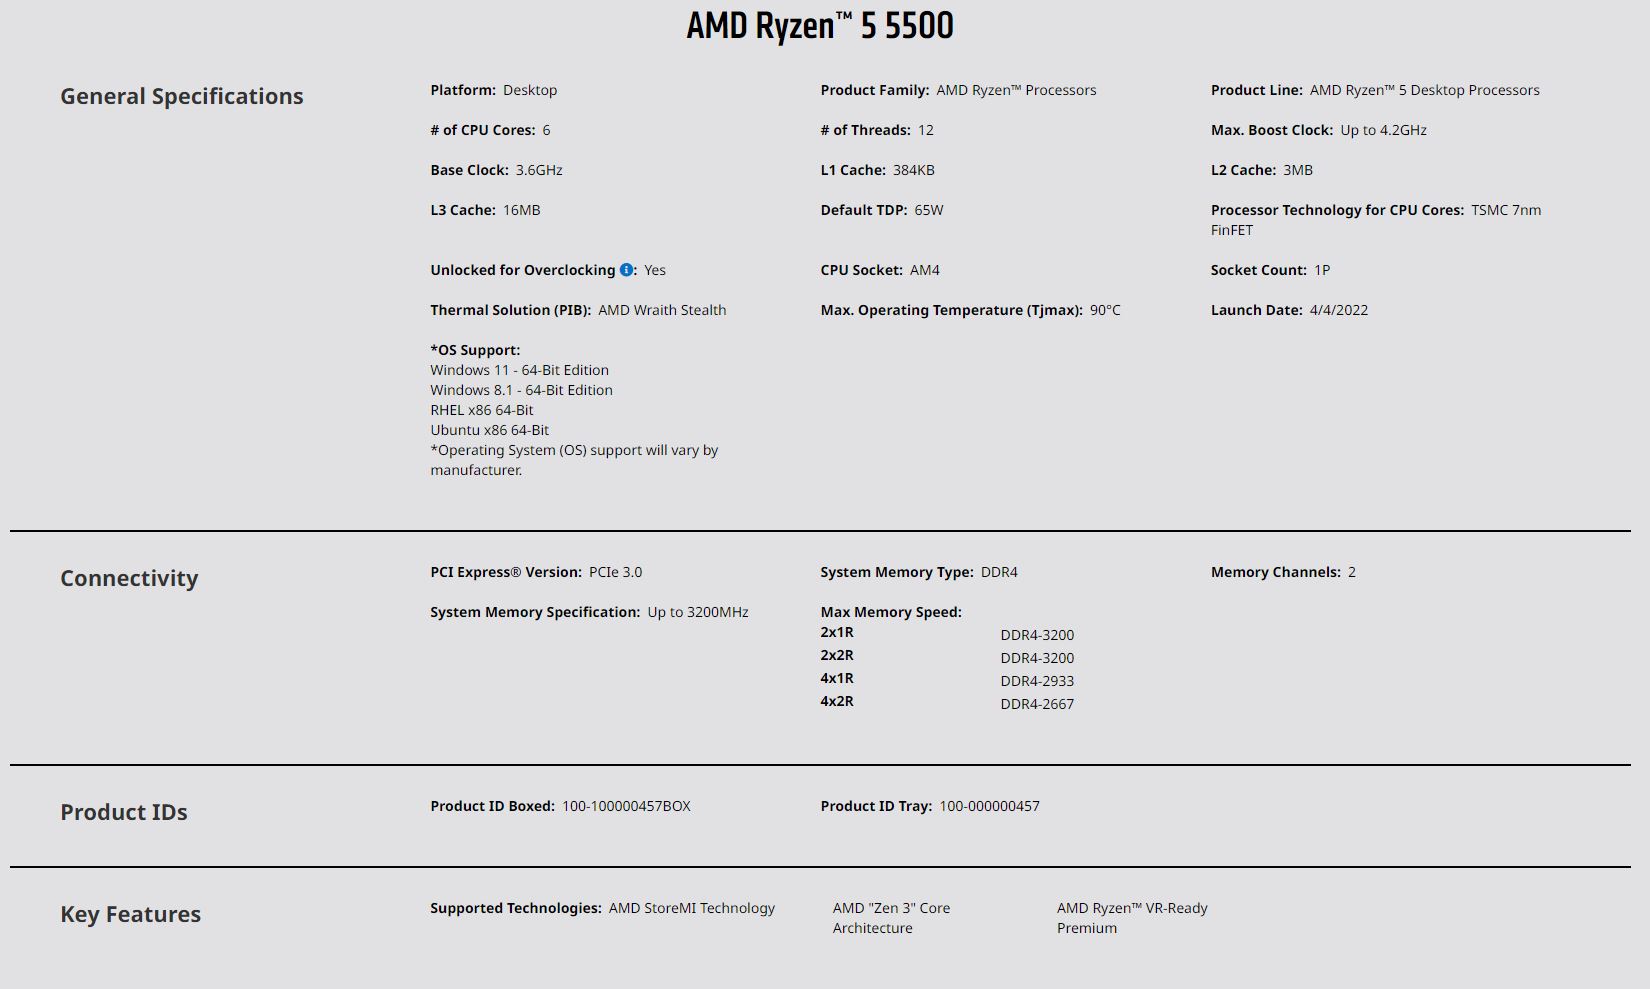 AMD Ryzen 5 5500 6 Core 12 Thread Up To 4.2Ghz AM4 - With Wraith